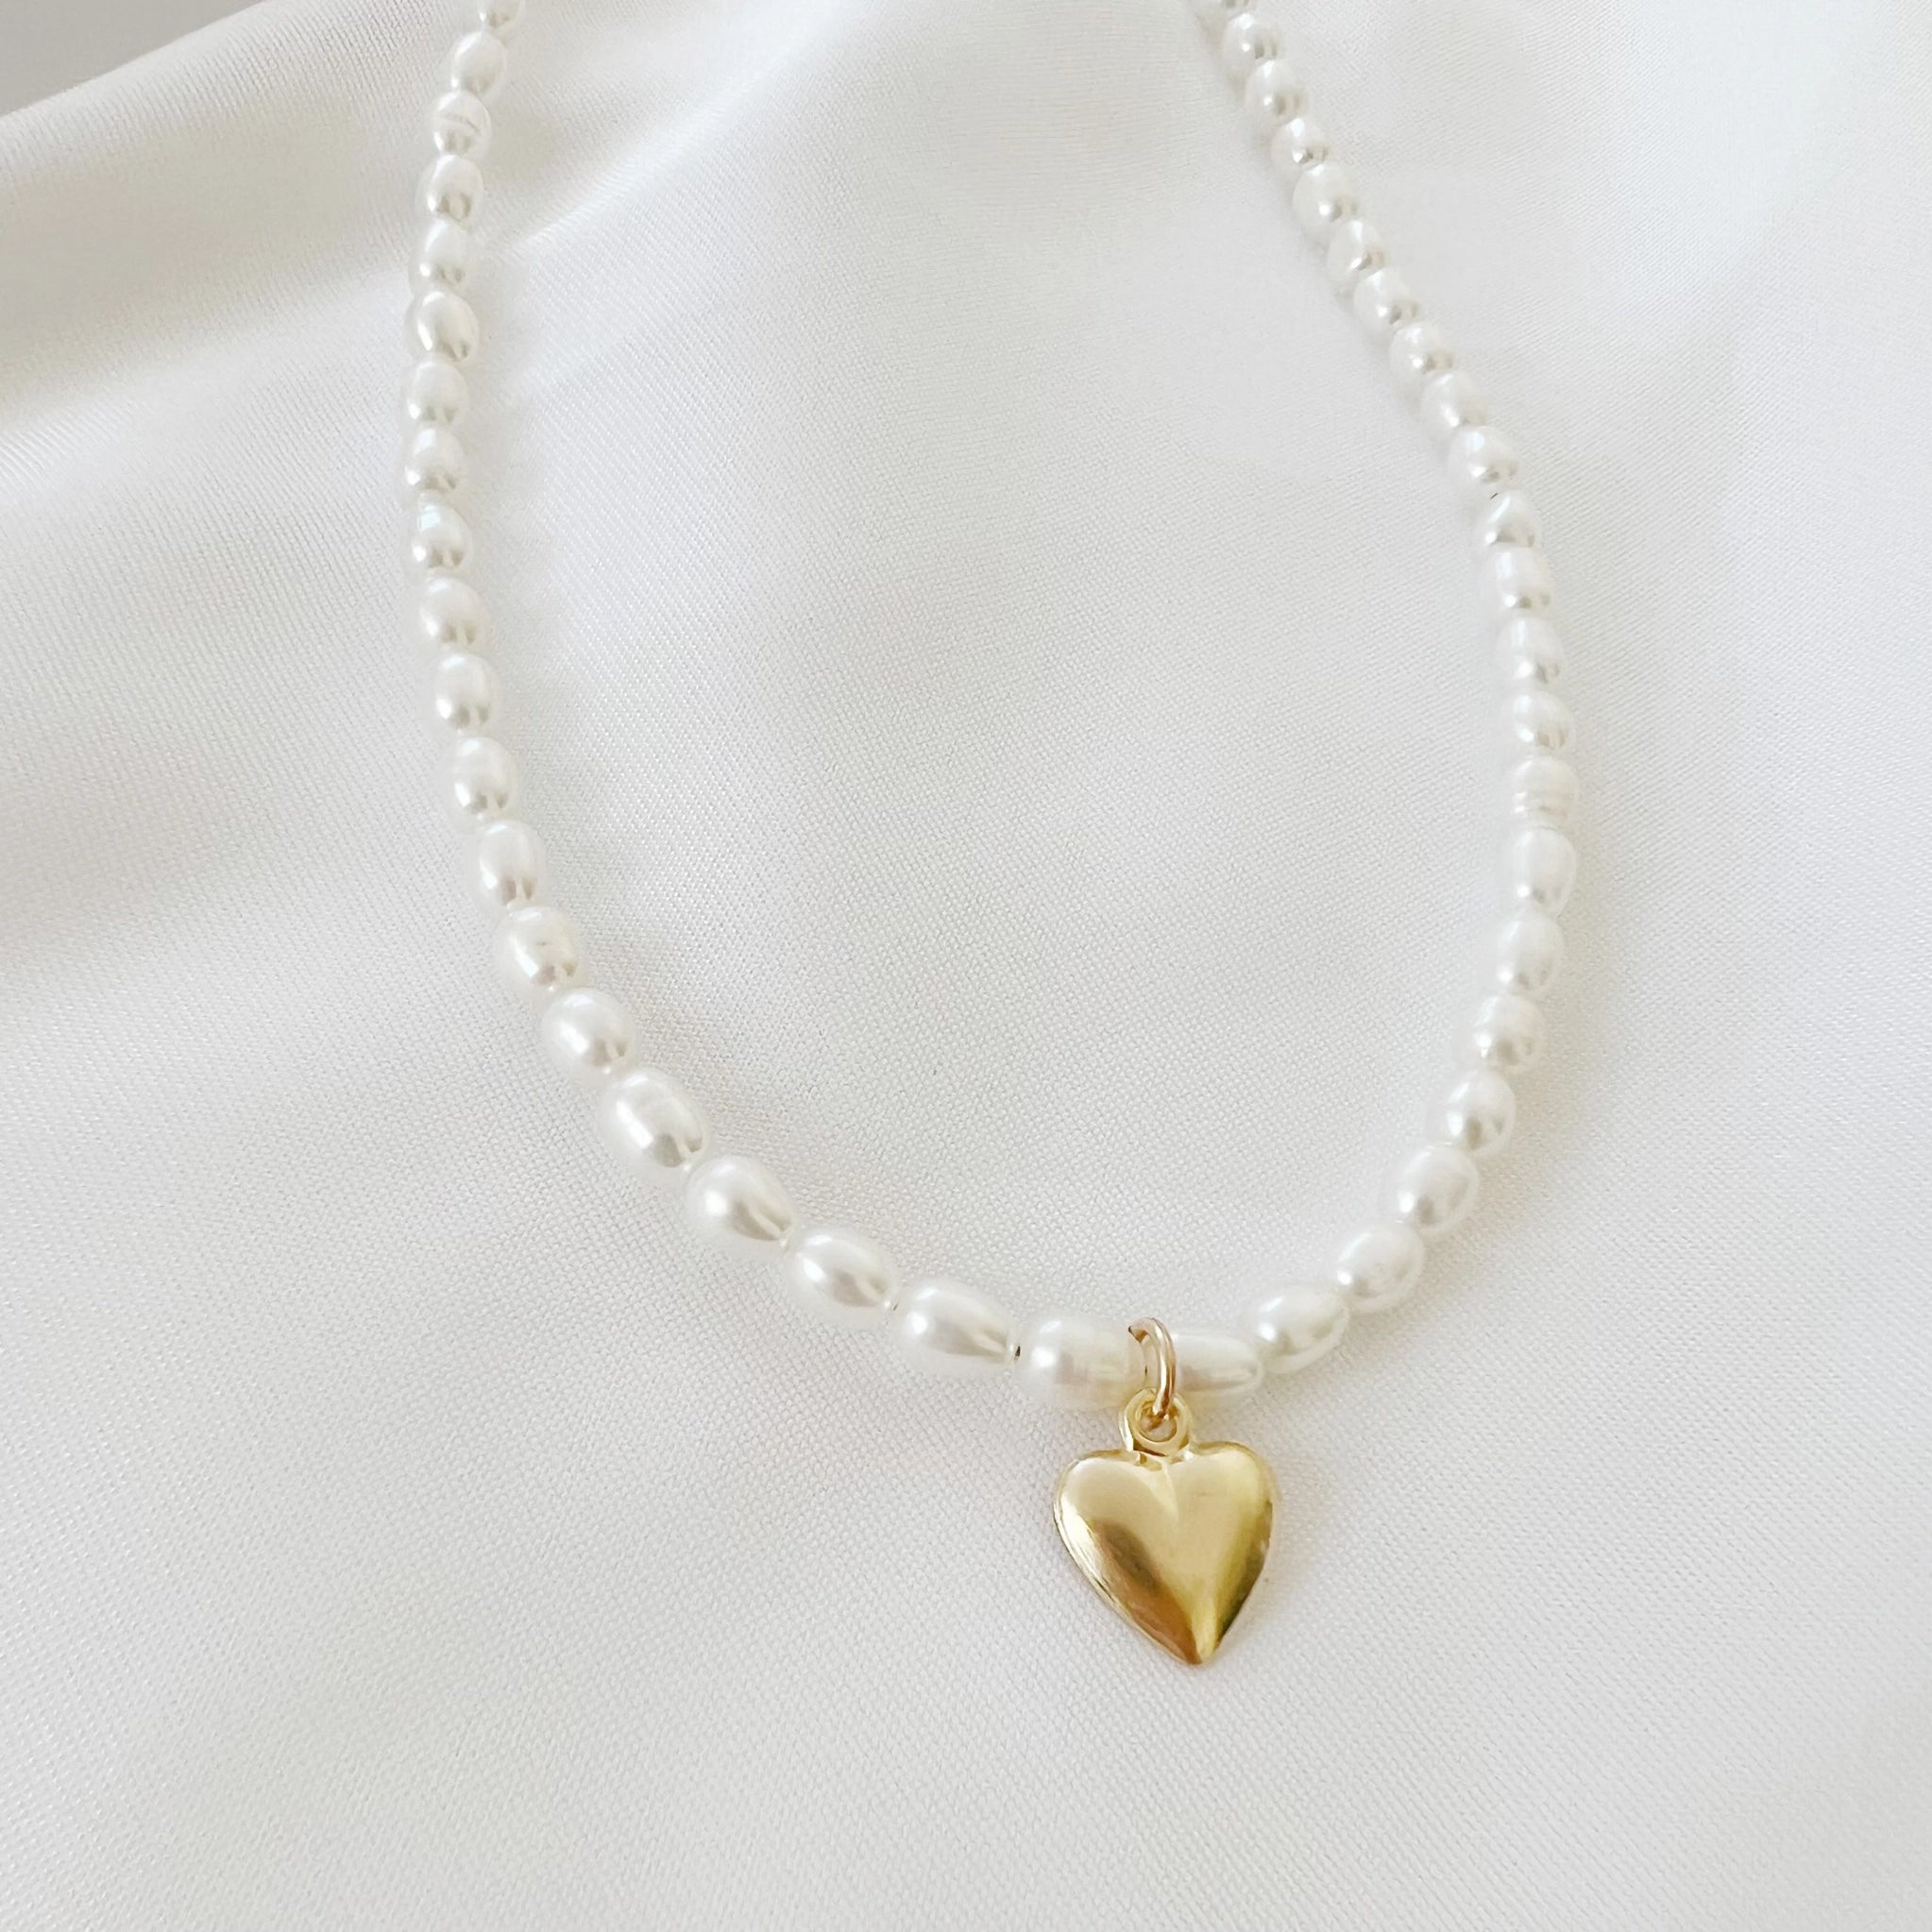 Heart Freshwater Pearl Beaded Necklace Gold Filled